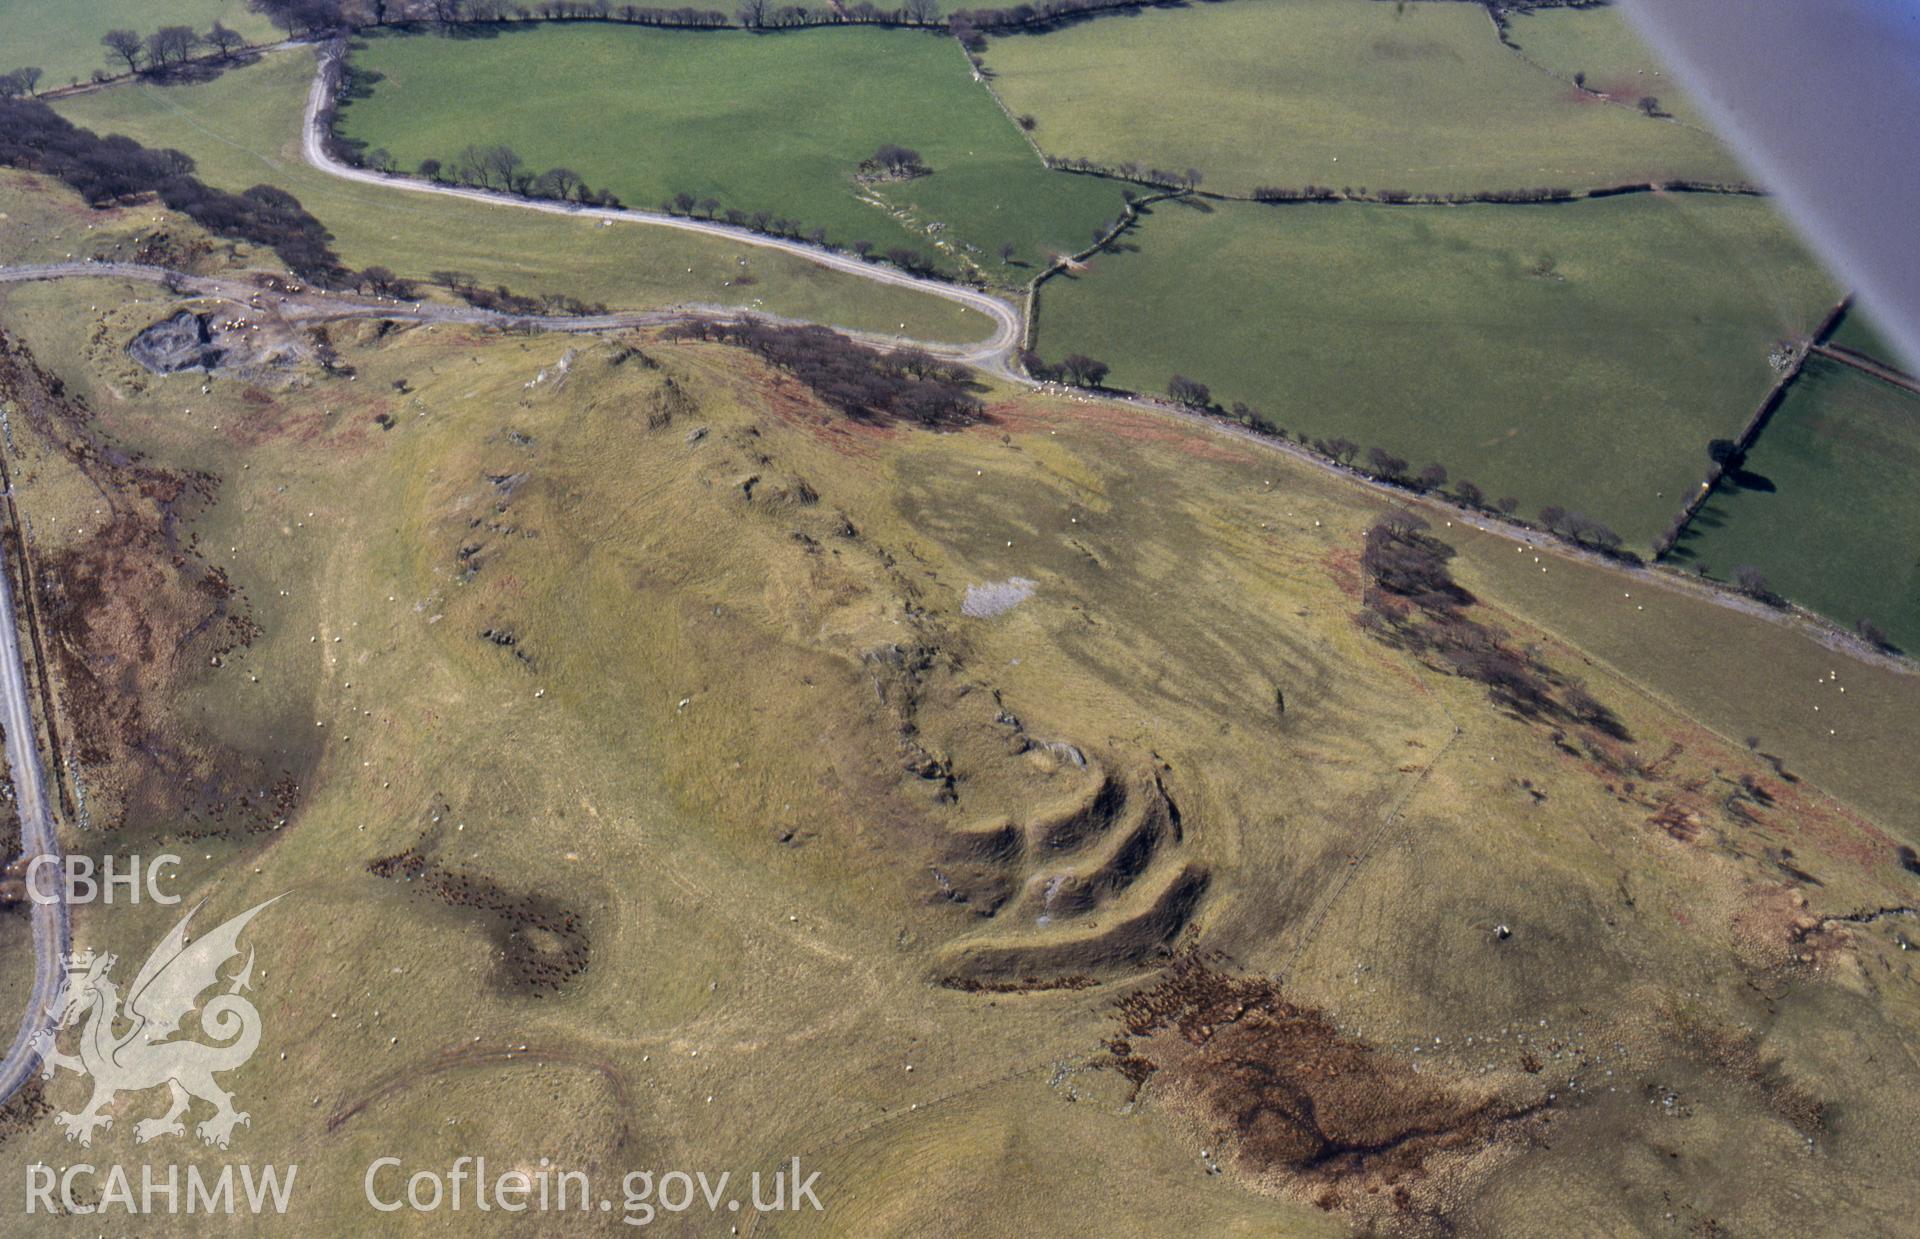 Slide of RCAHMW colour oblique aerial photograph of Pen Y Bannau Hillfort, Nr. Strata Florida, taken by C.R. Musson, 23/3/1995.